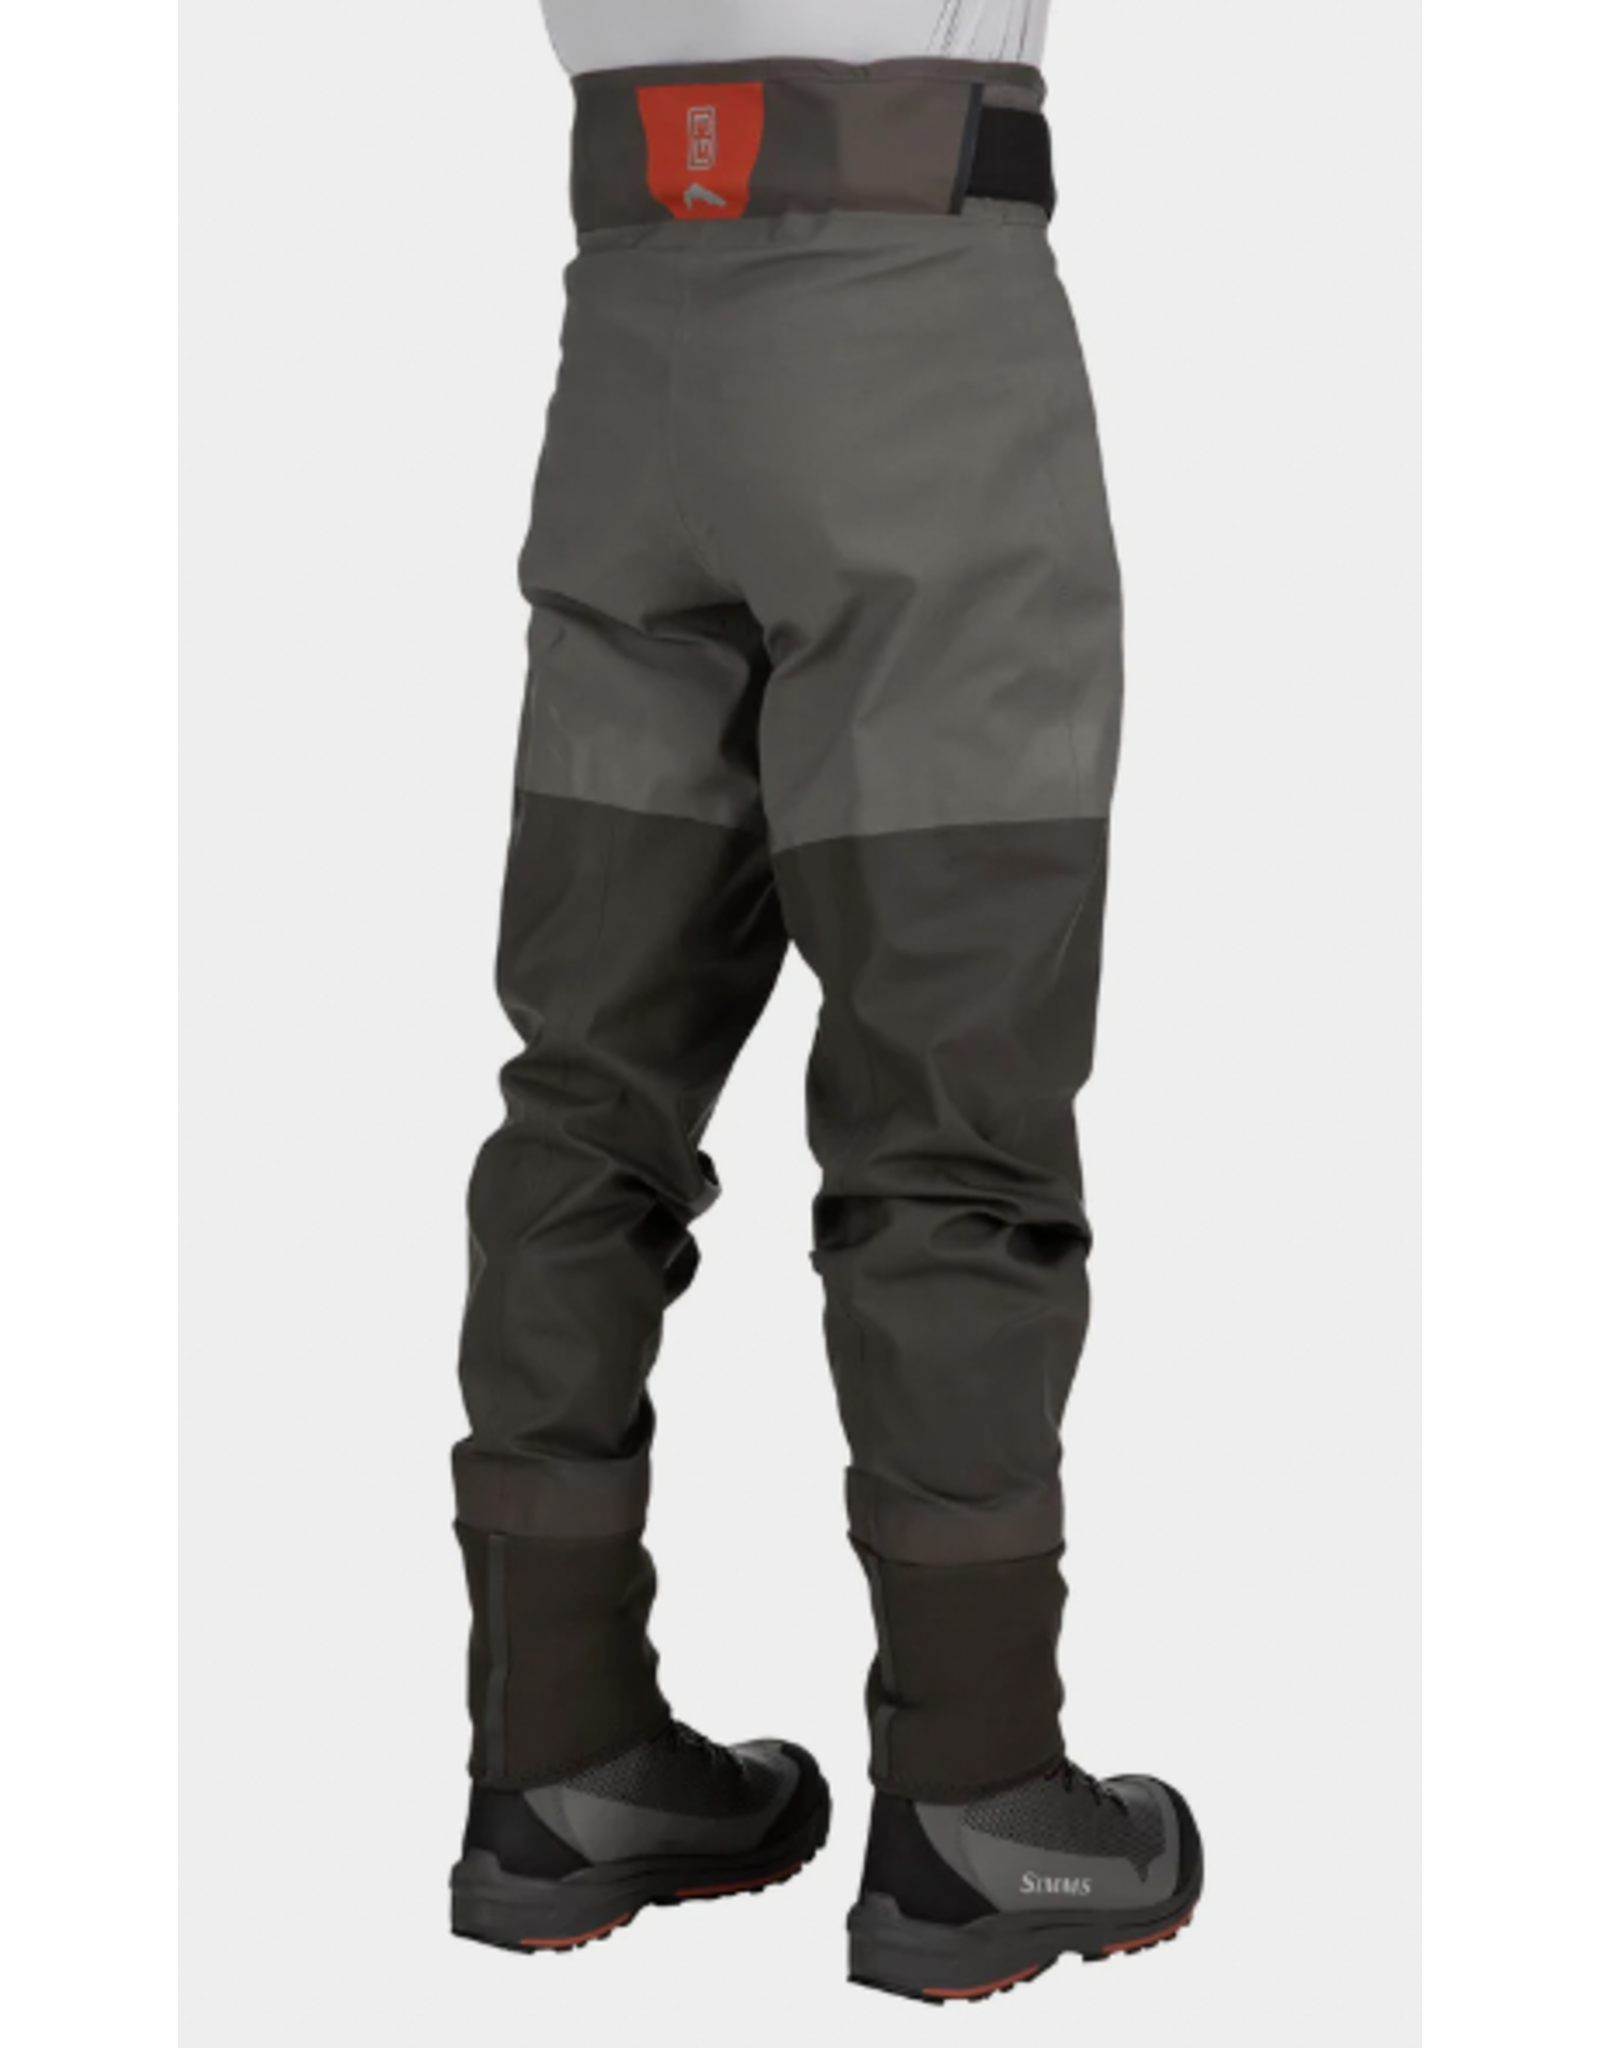 NEW Simms G3 Guide Pant - Royal Gorge Anglers